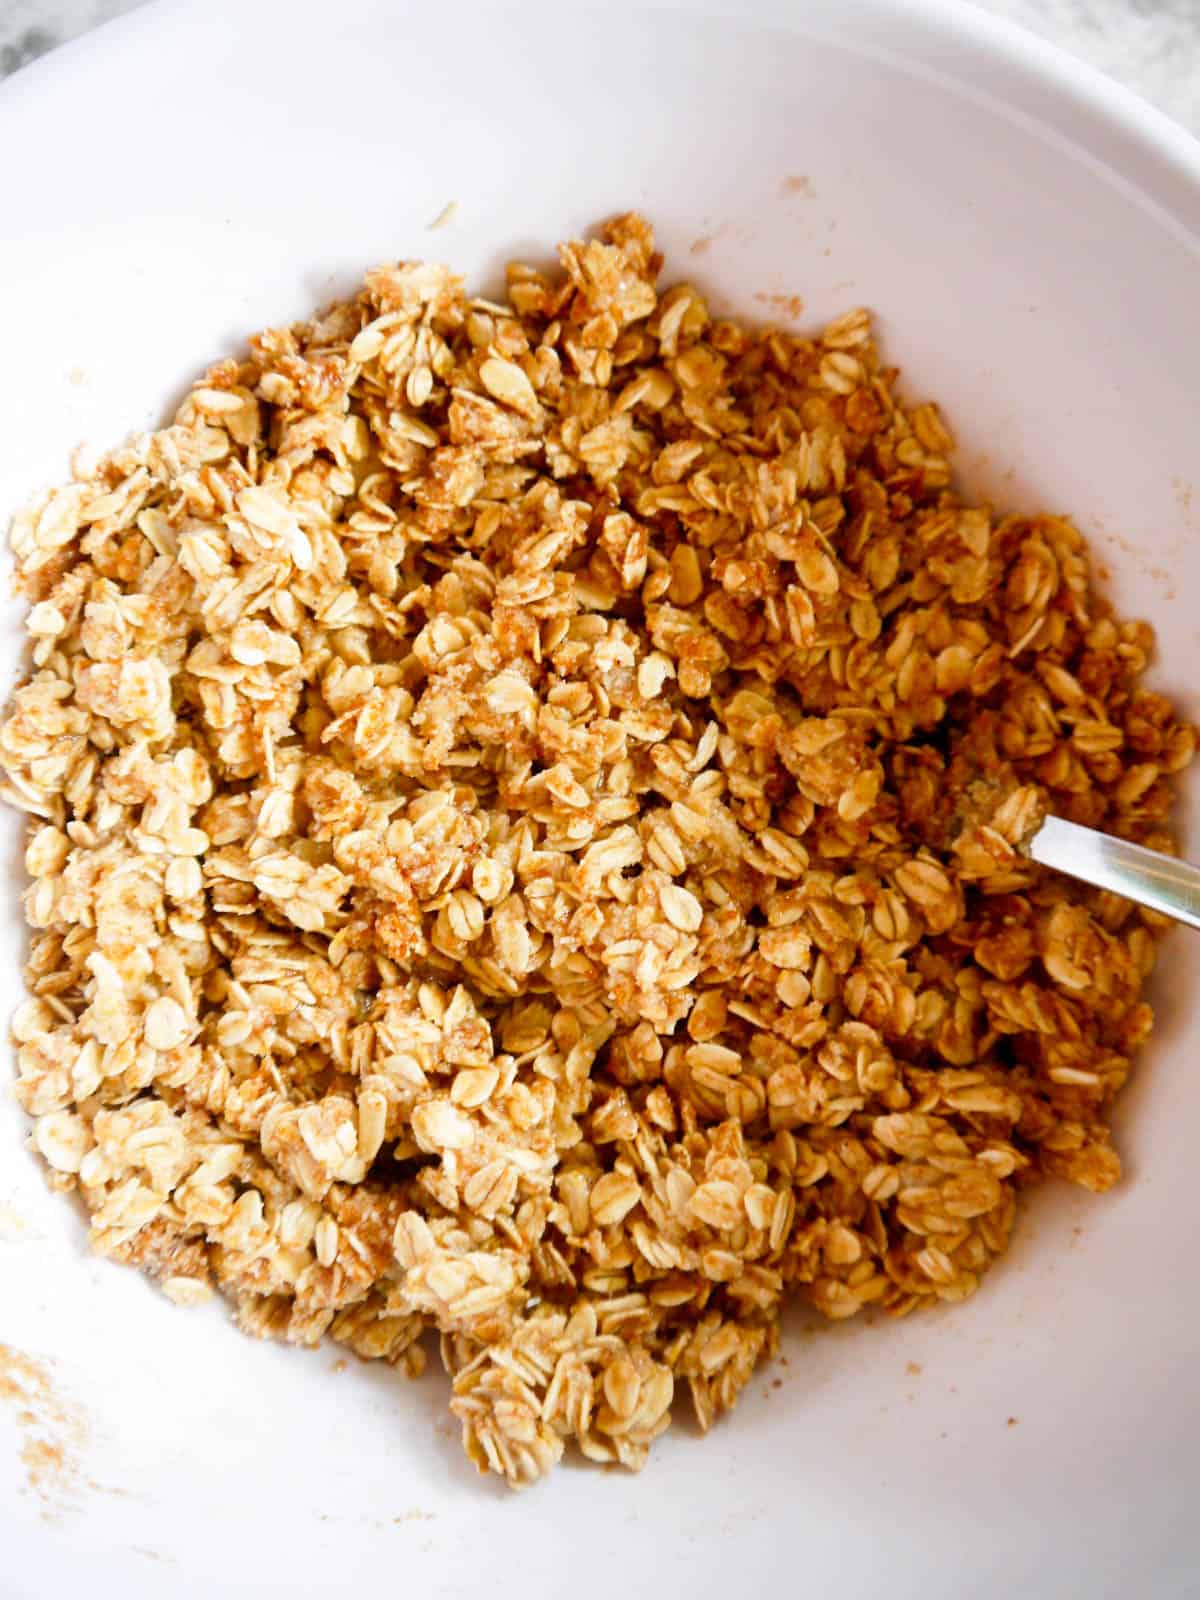 Almond flour oat topping in a bowl.